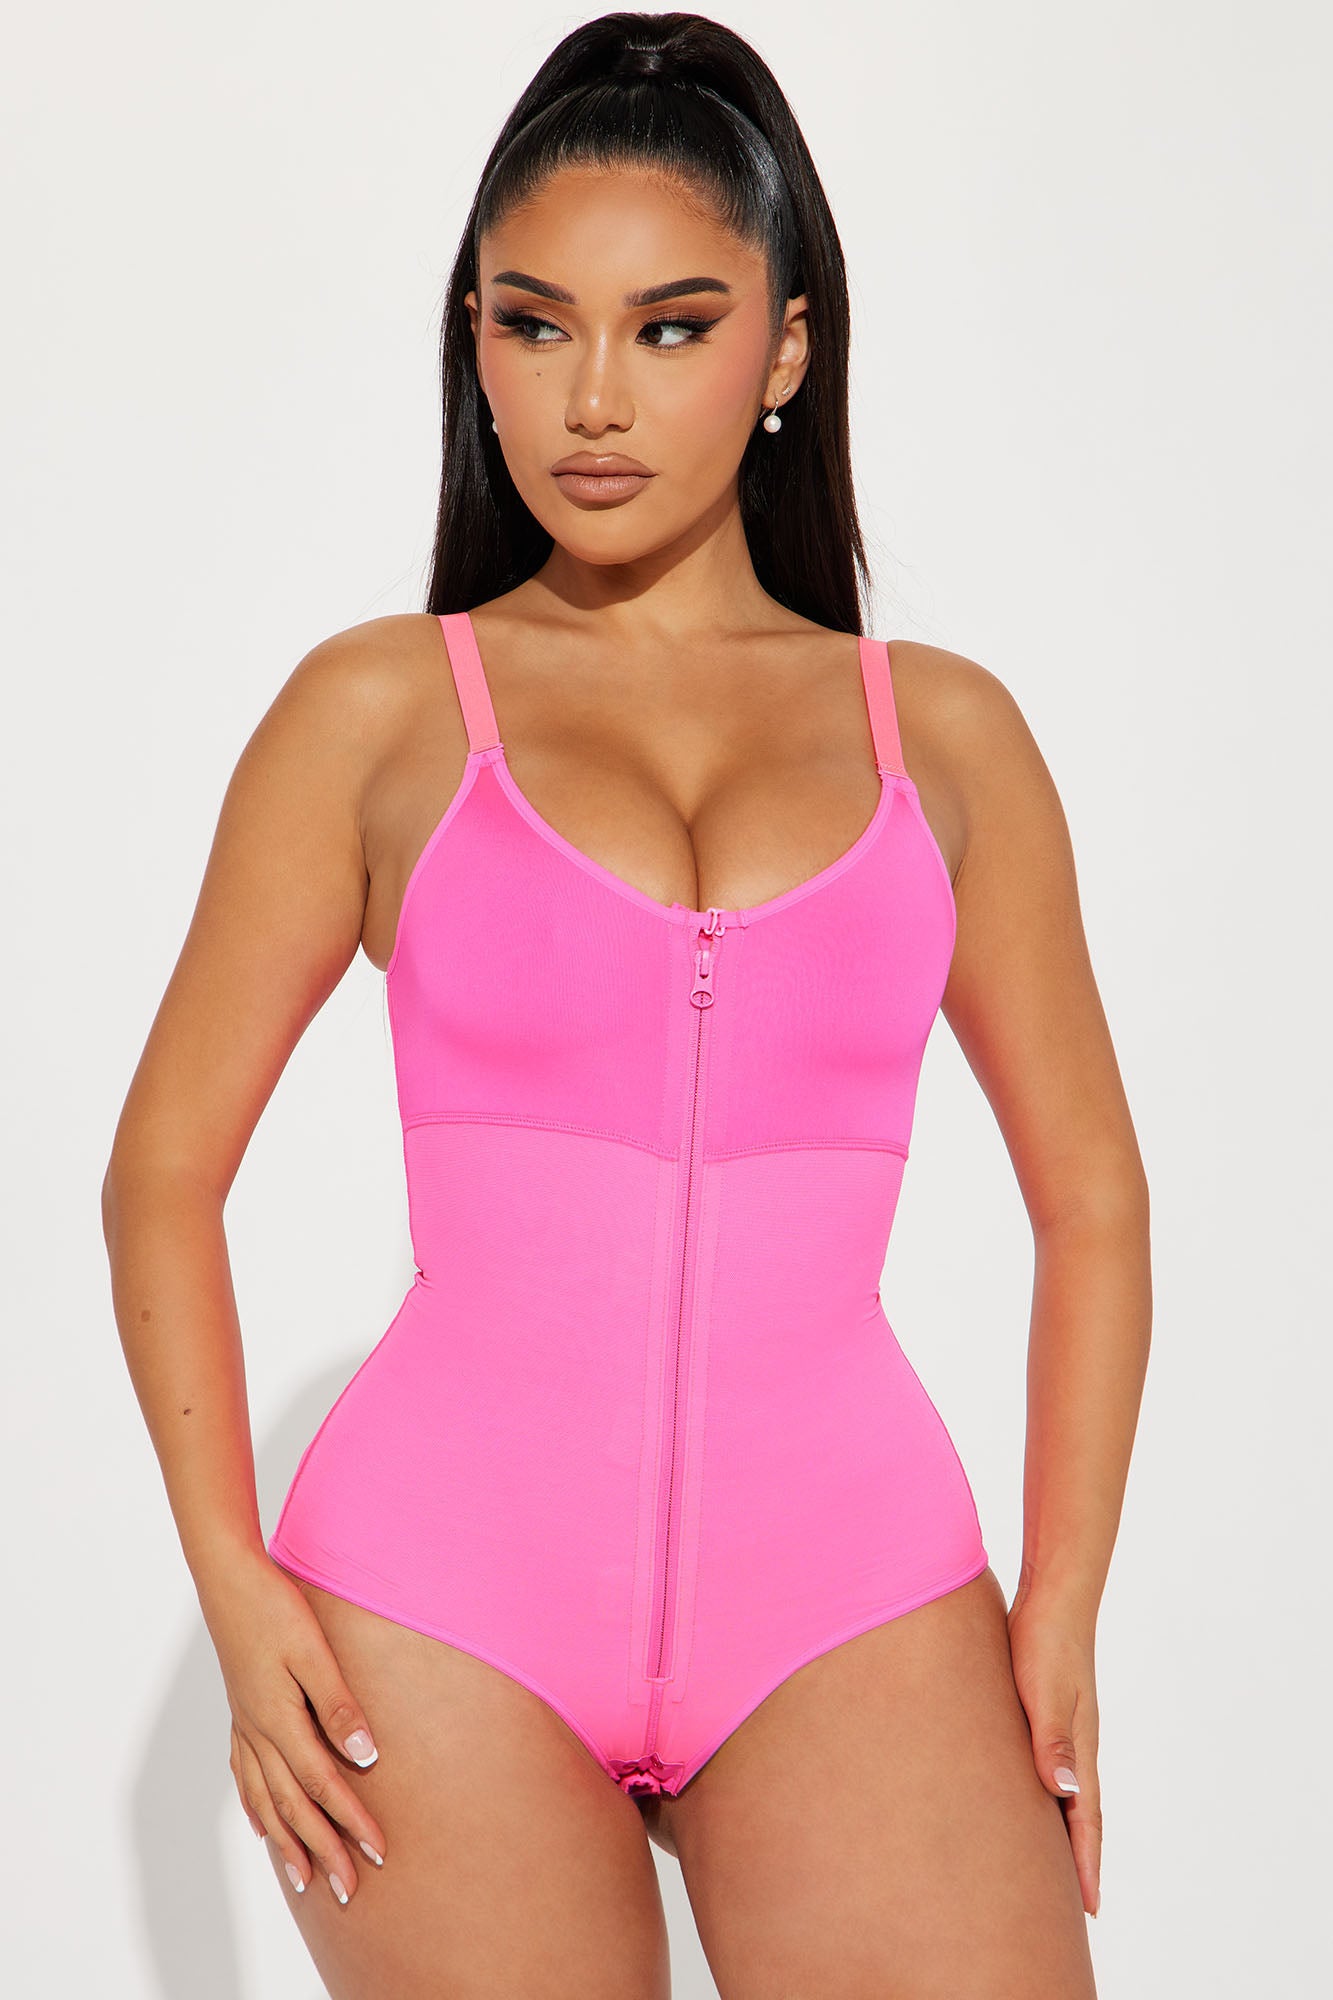 Snatched Tight Sculpting Shapewear Bodysuit - Hot Pink